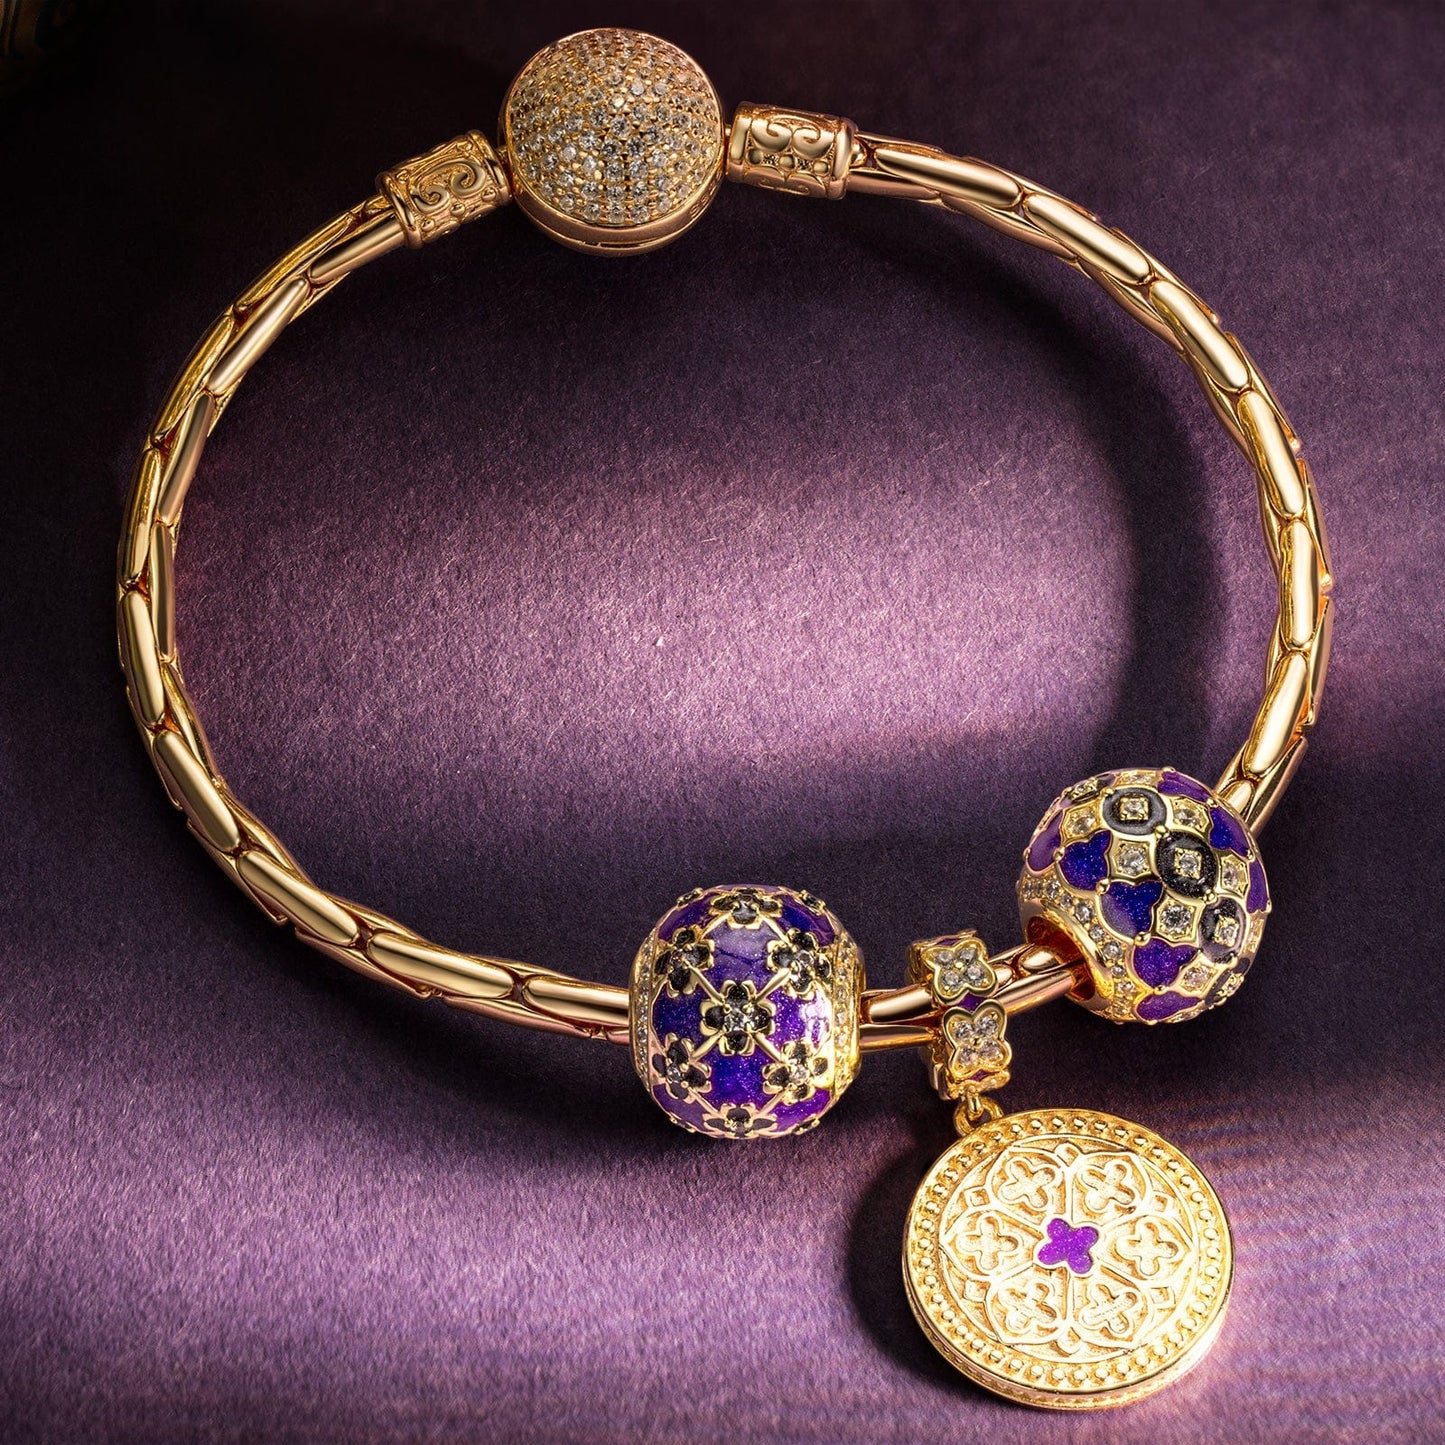 Sterling Silver The Purple Flower Sea Charms Bracelet Set With Enamel In 14K Gold Plated